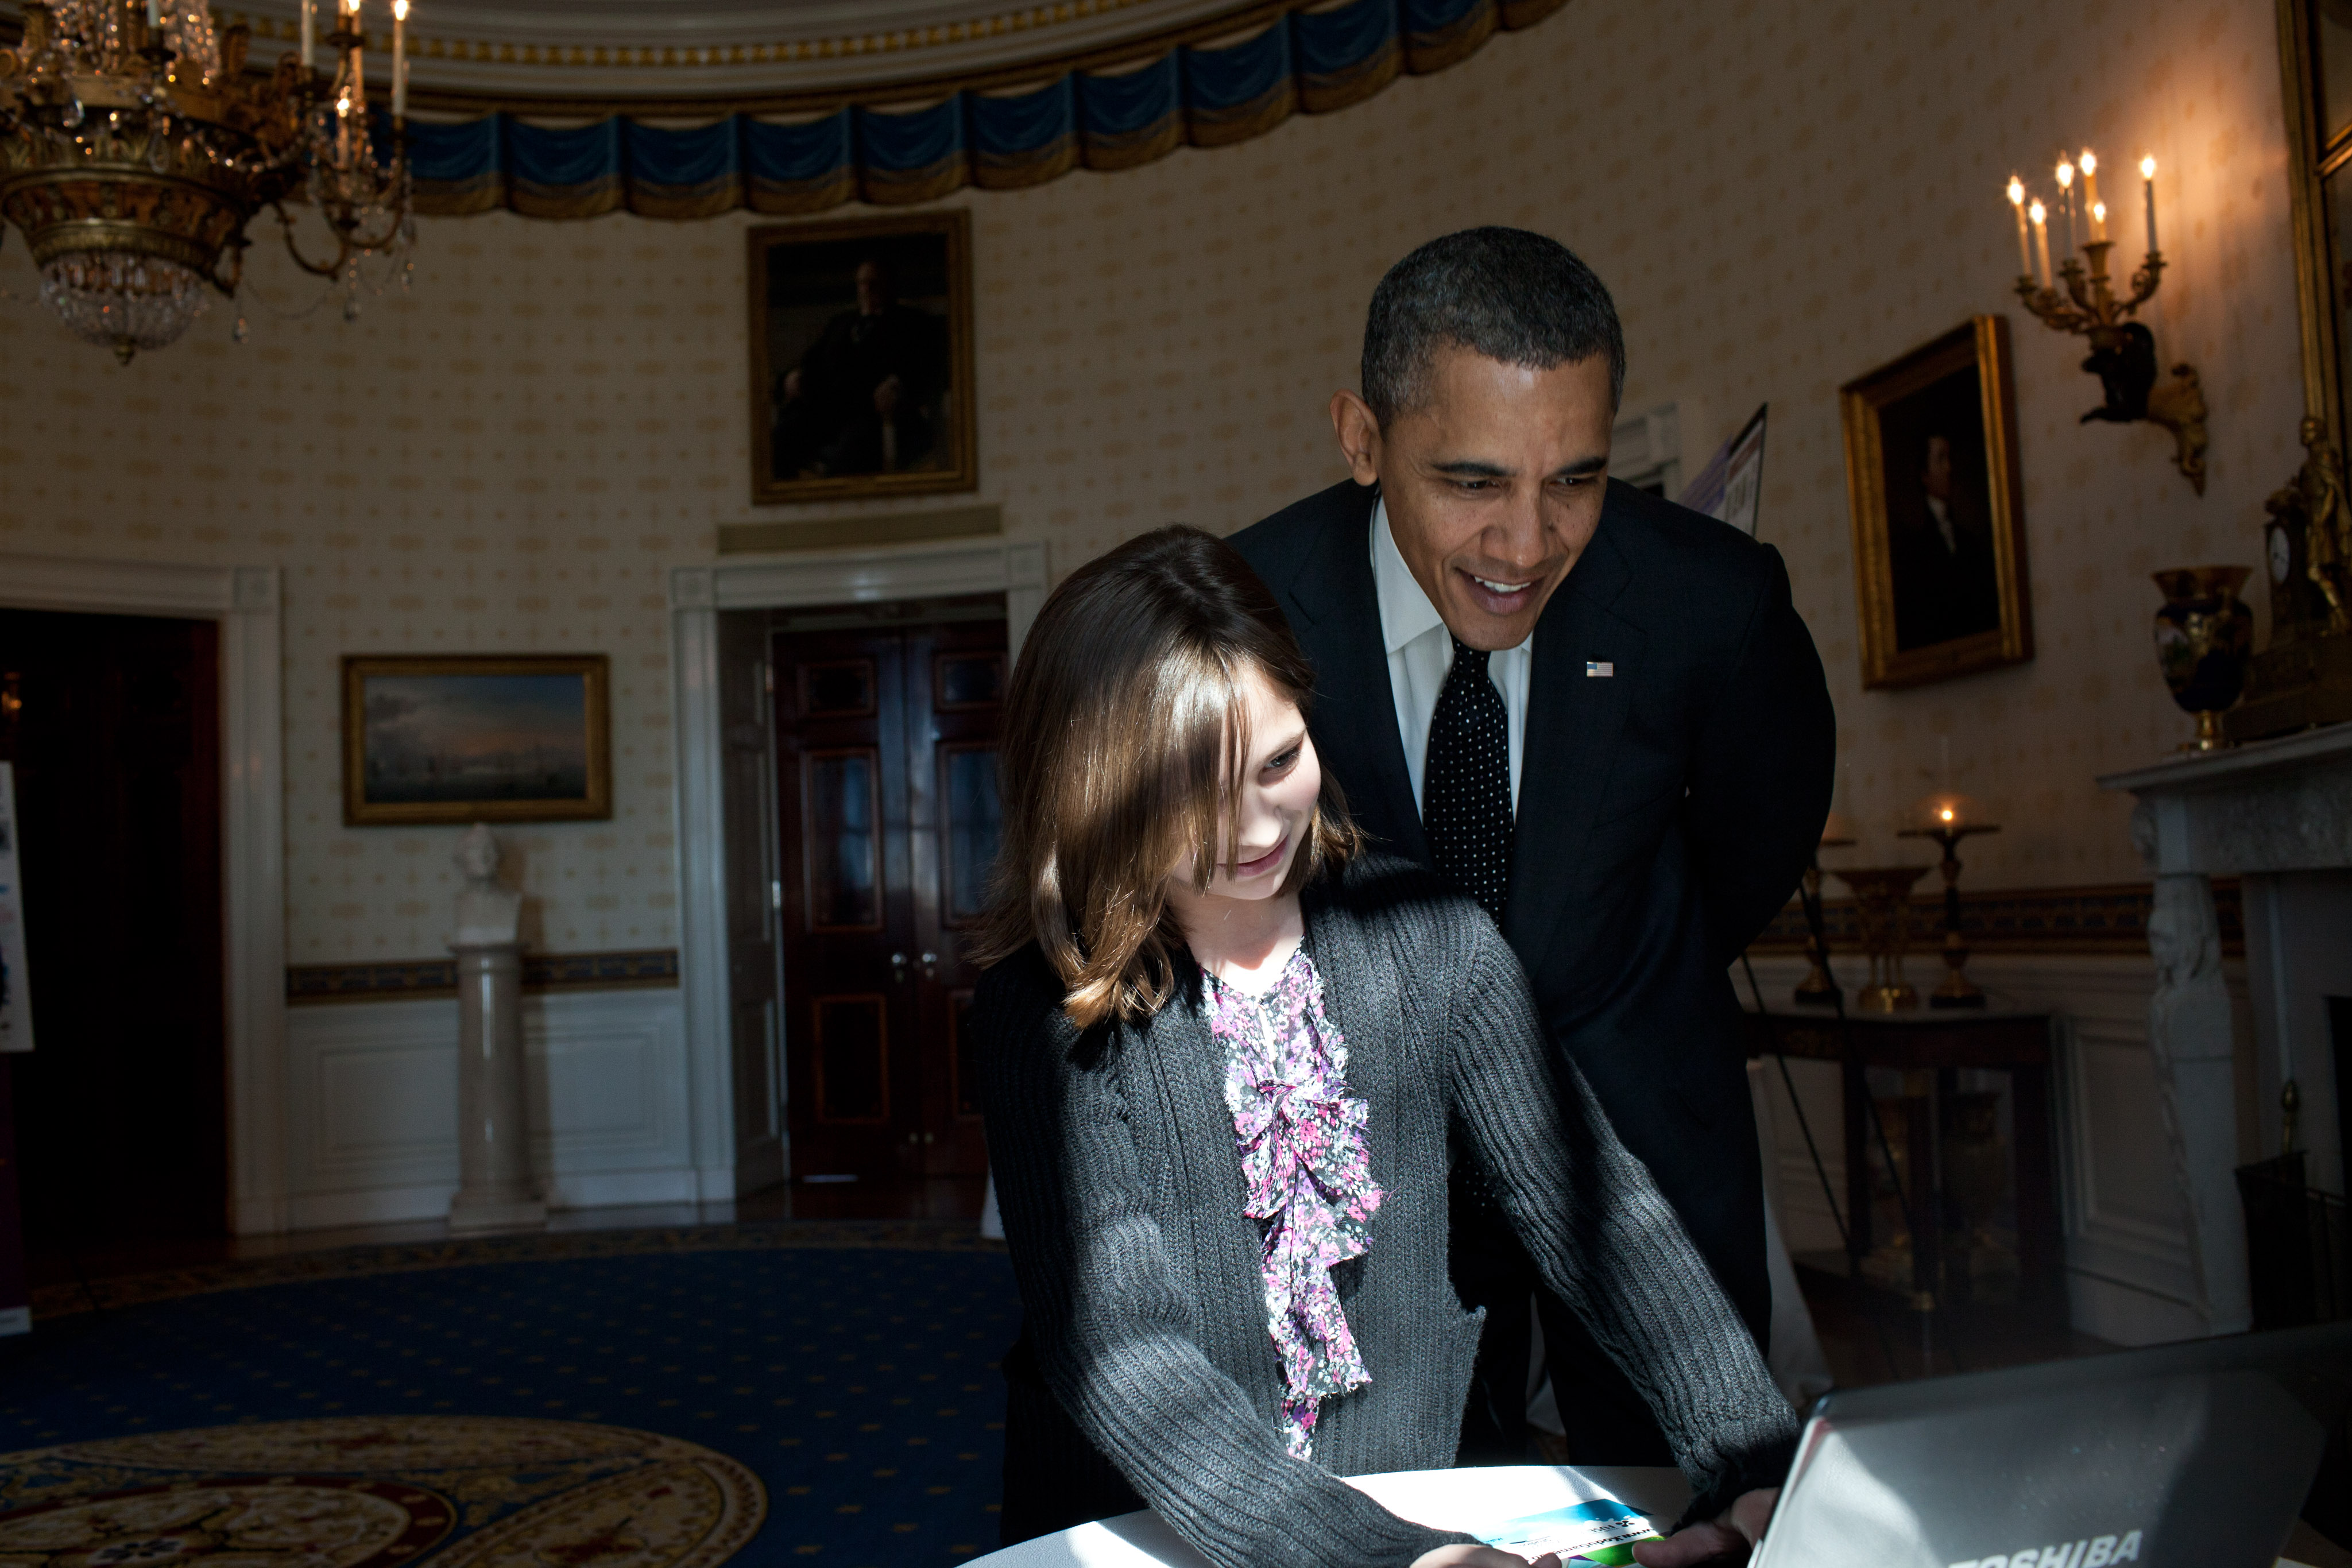 President Barack Obama looks over the shoulder of Hannah Wyman, 11, as she demonstrates her project in the Blue Room, Feb. 7, 2012, during the second annual White House Science Fair